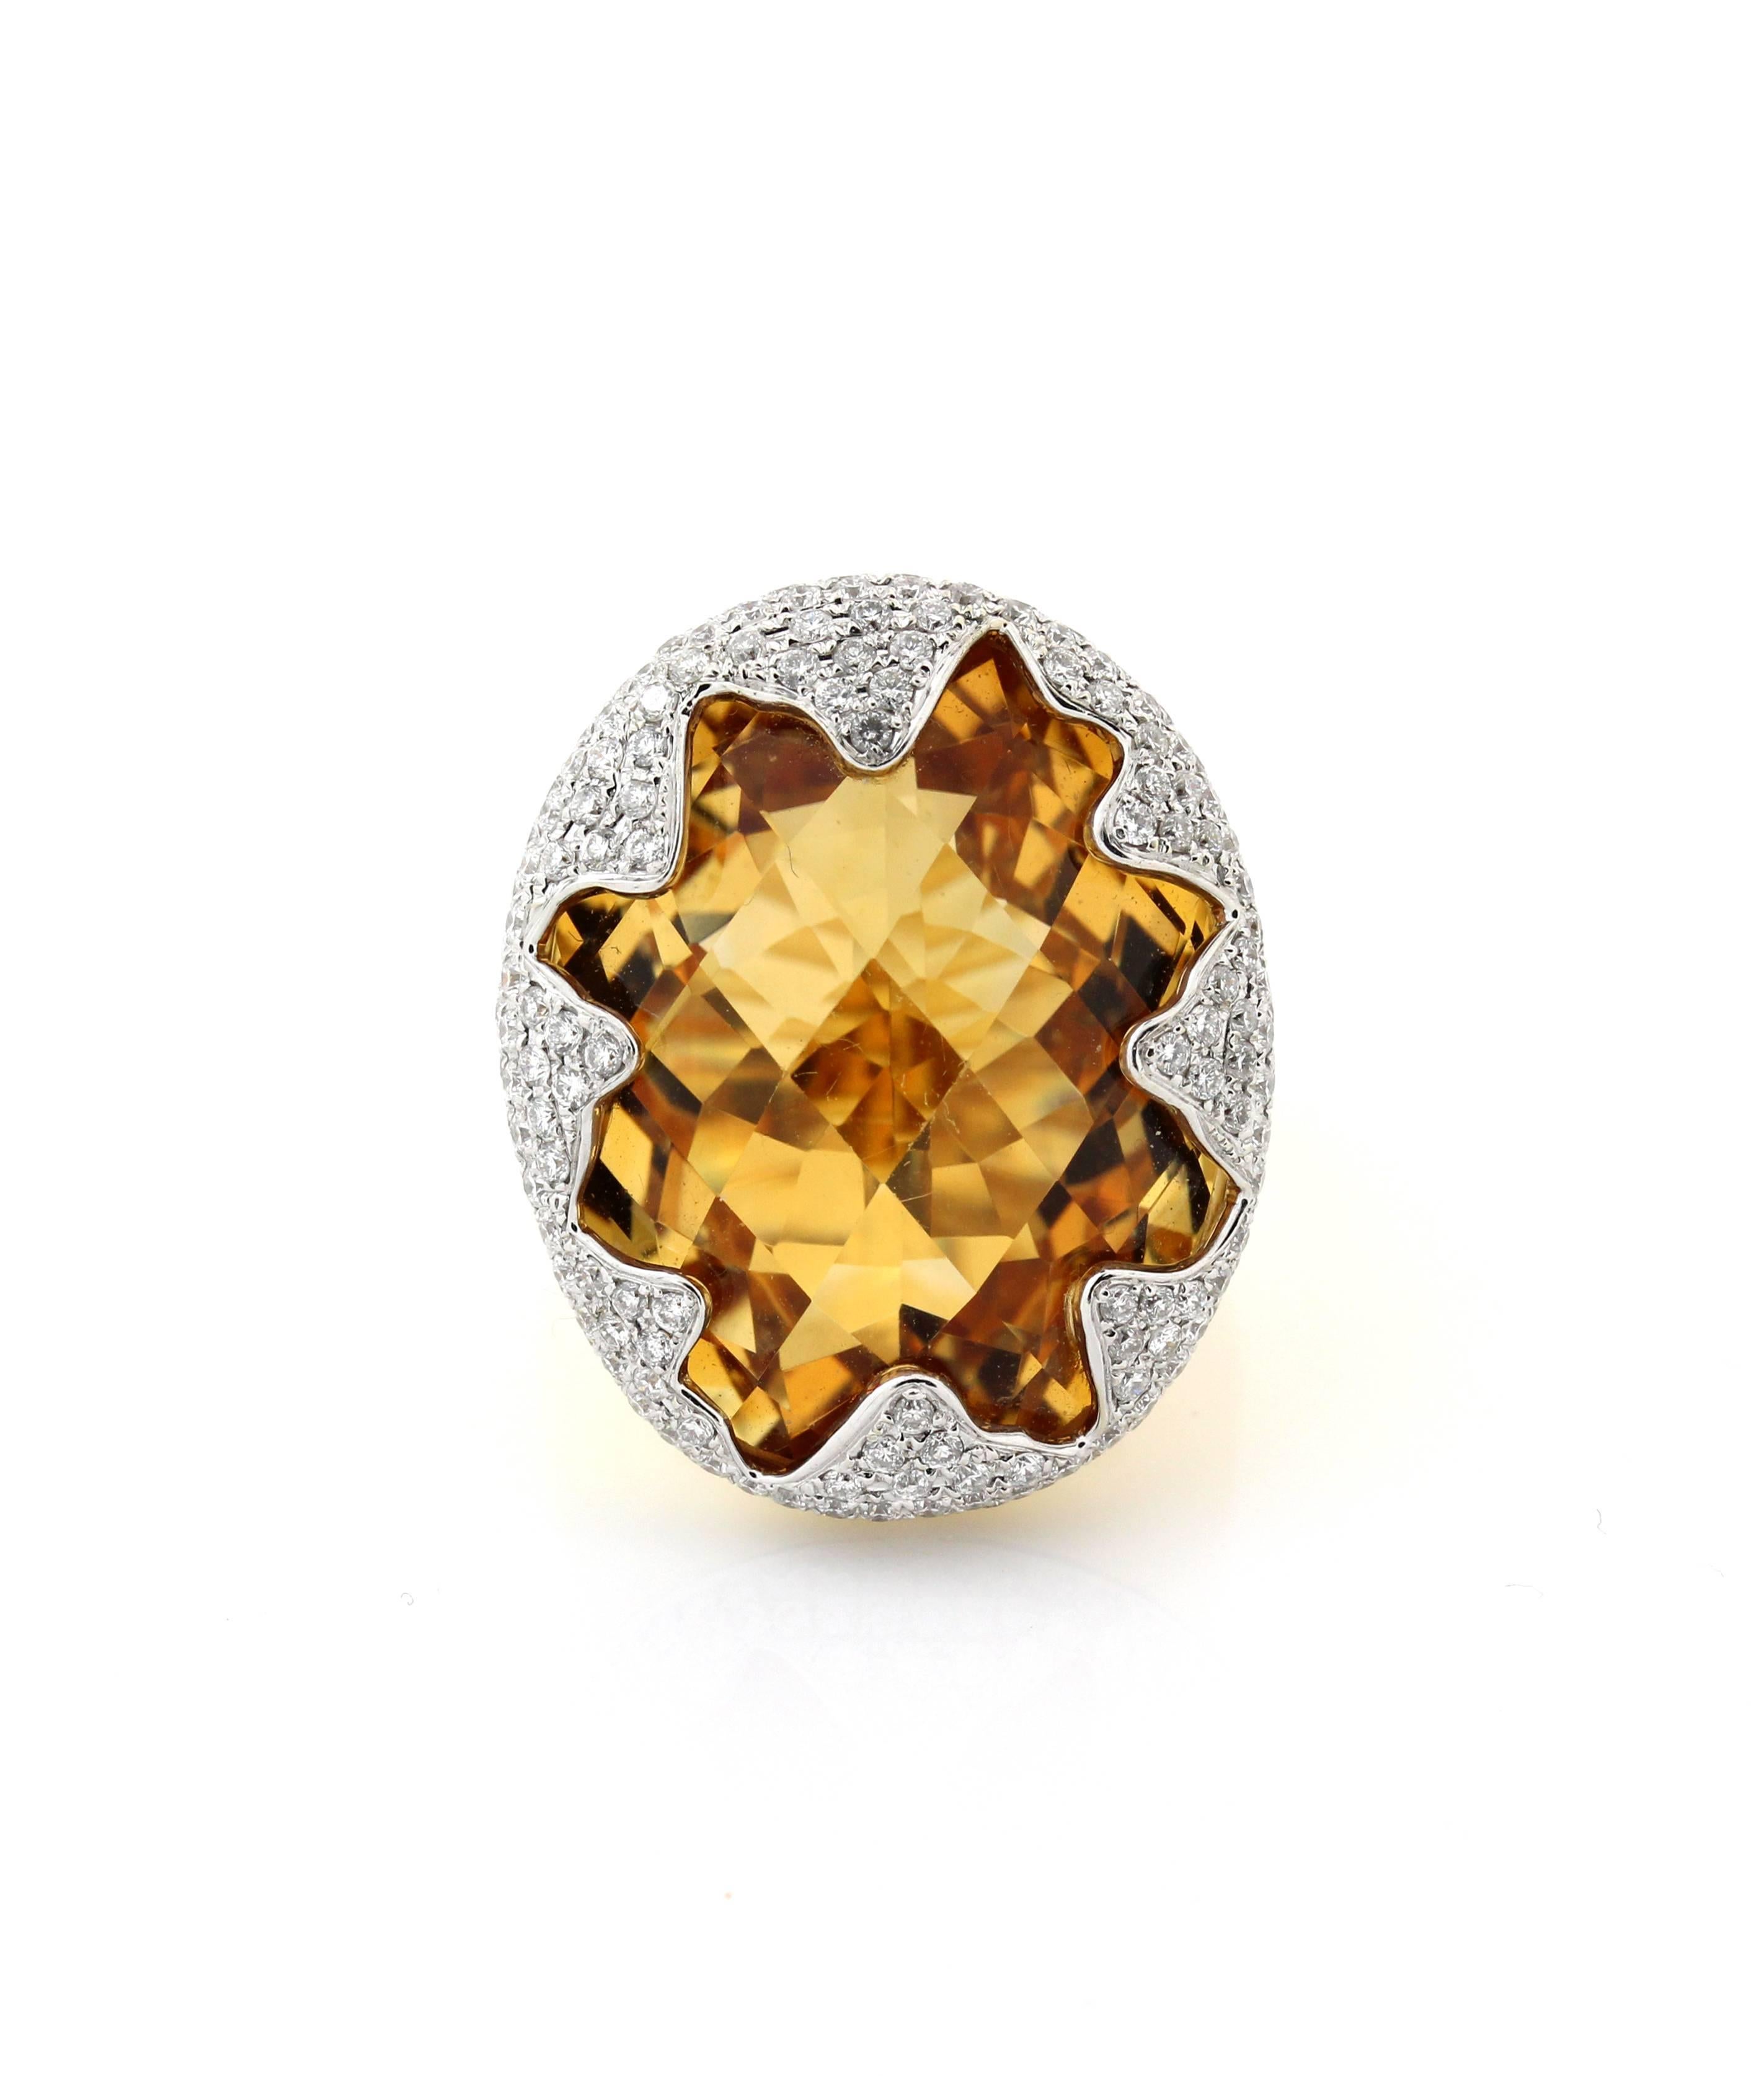 Oval Citrine 18K Yellow Gold and Diamond Large Cocktail Ring

Center Citrine is gorgeous in color, has a slight color change aspect. The carat weight is unknown but we are estimating around 20 carat total weight, oval. 

1.30 carat diamonds total